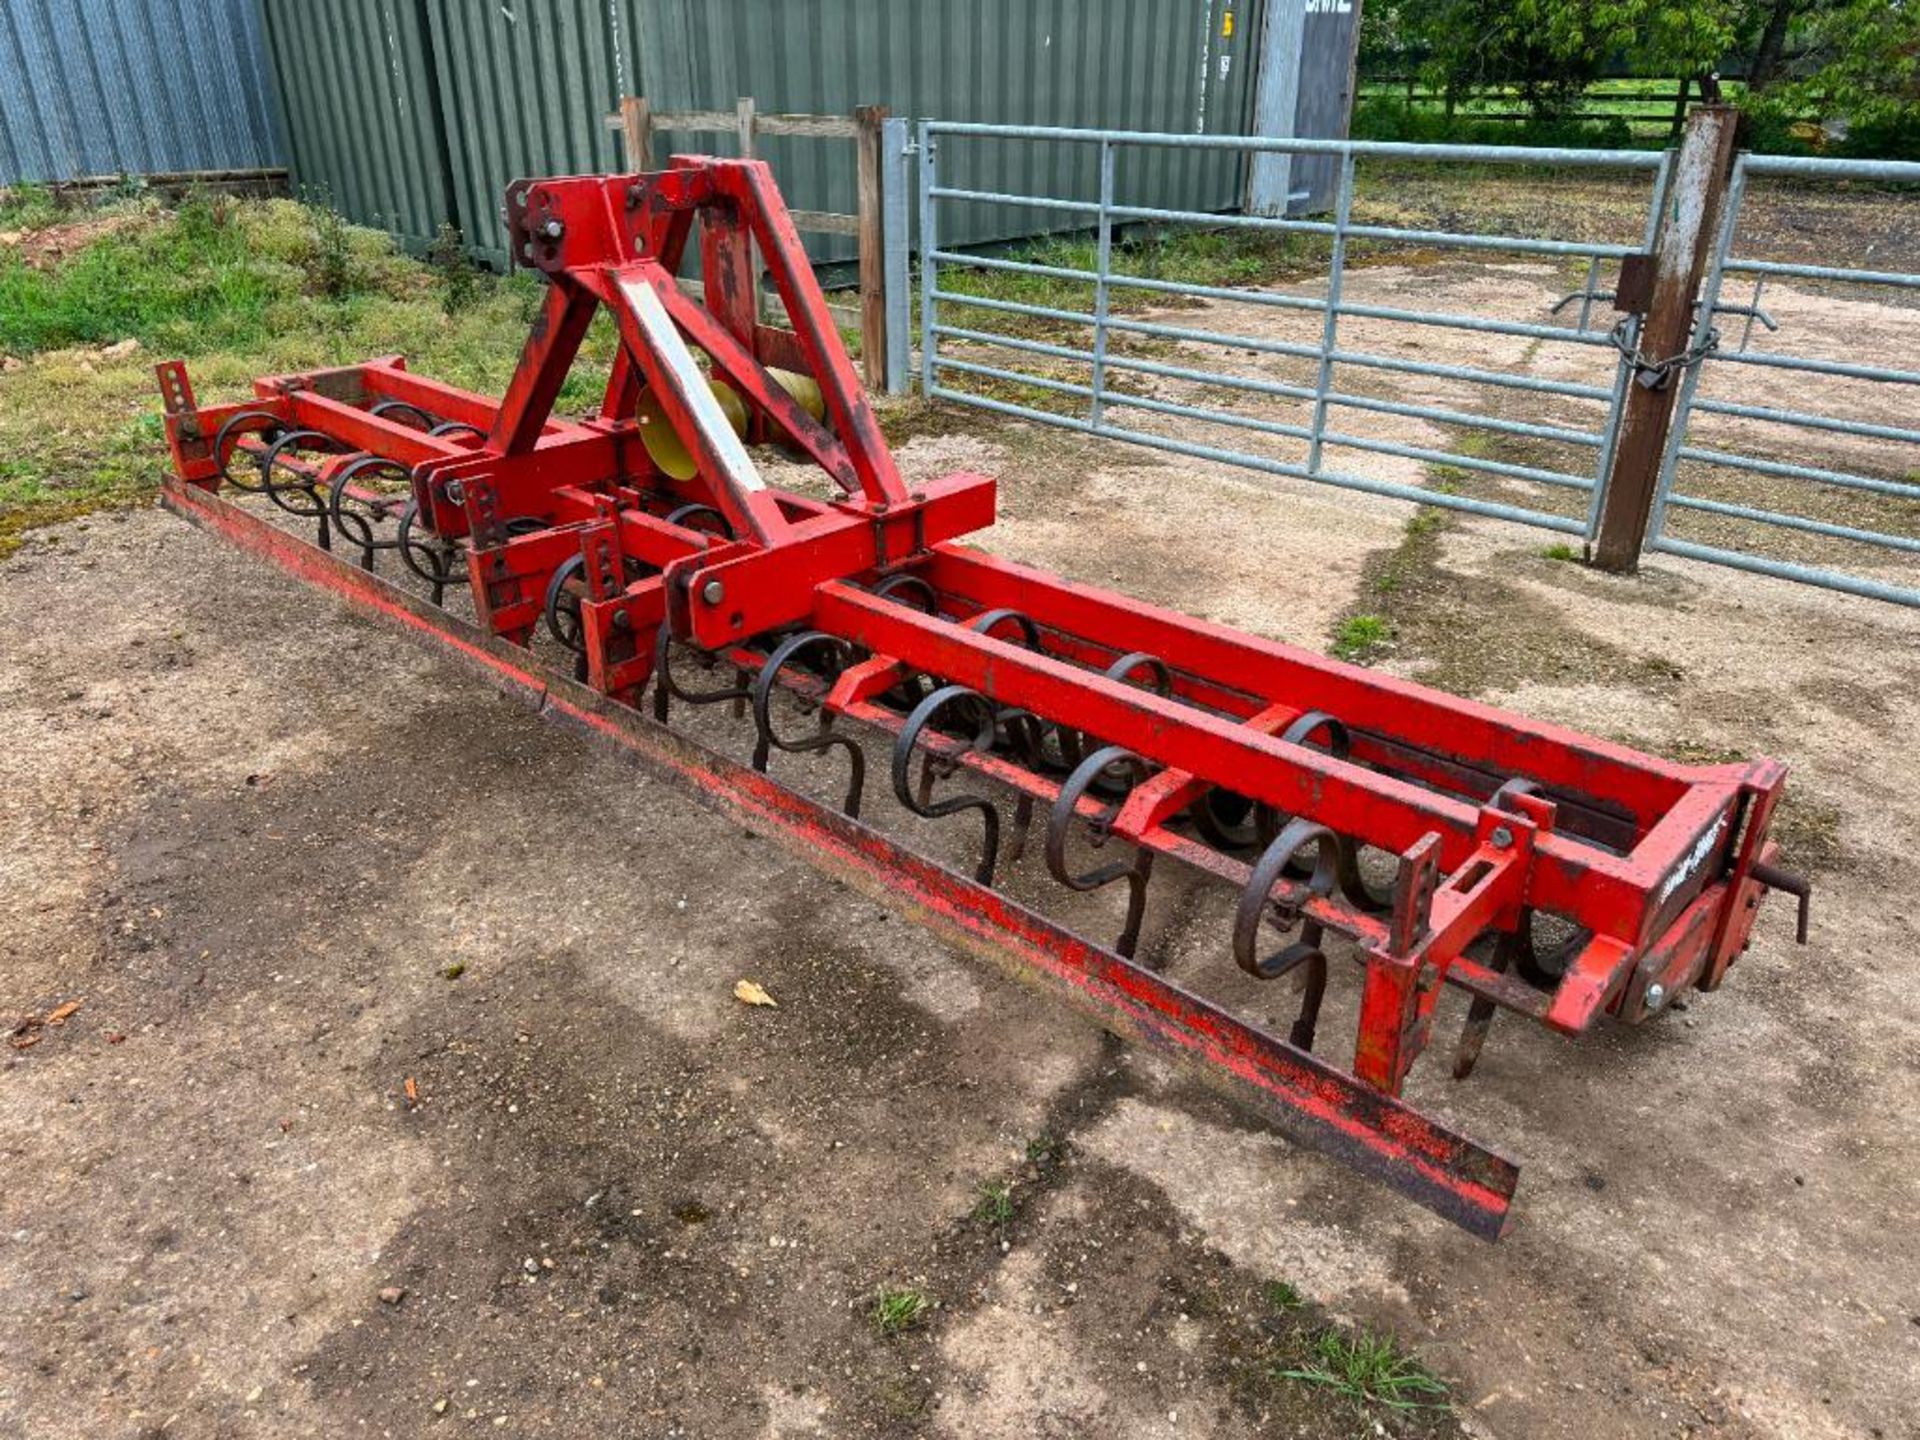 Farmforce 4m drill mate with springtines and rear flexi-coil packer